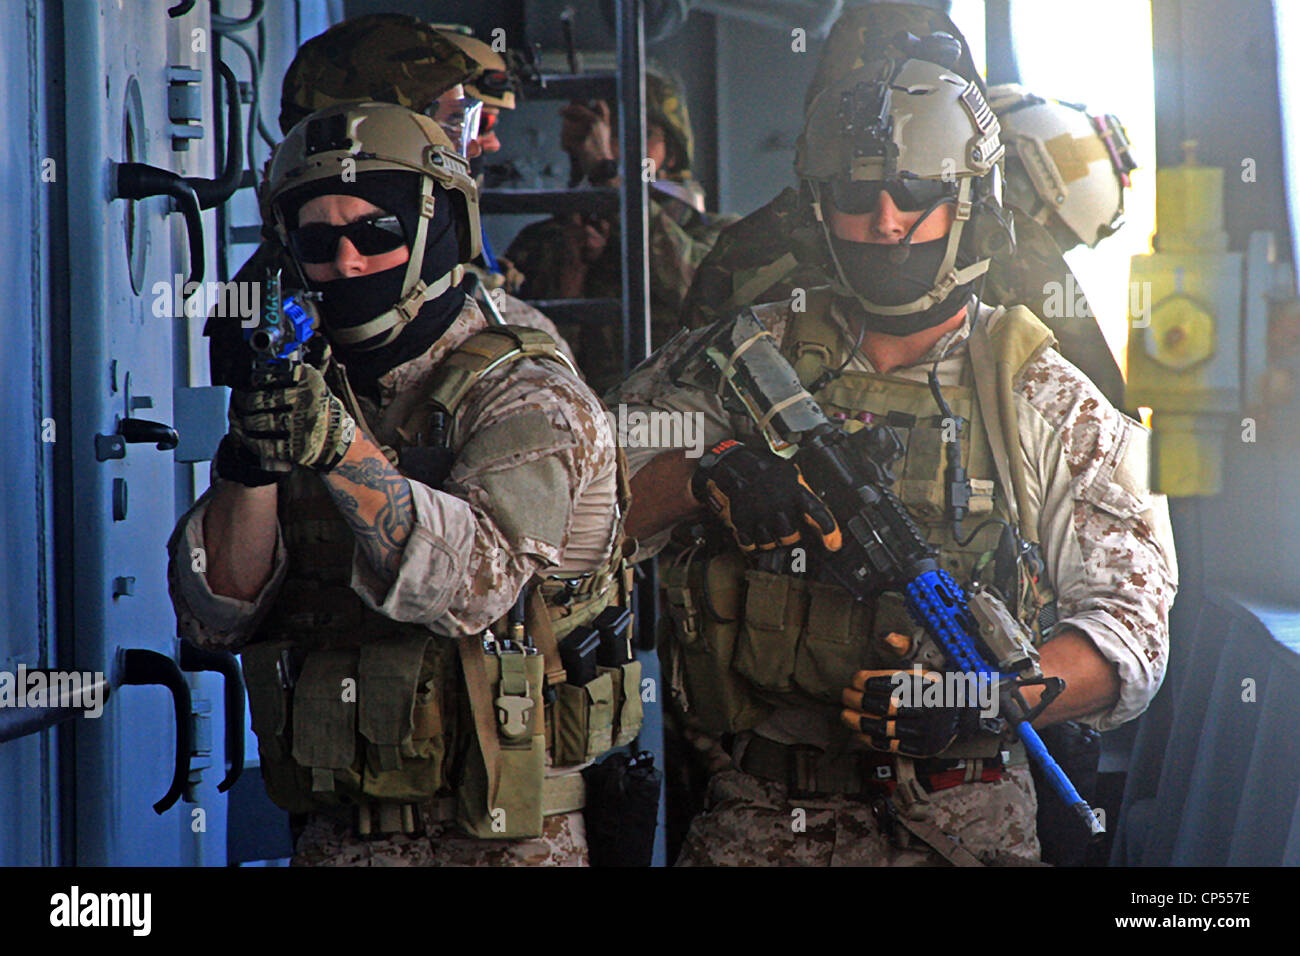 US Special Operations Forces during a staged firefight demonstrating the range of US Army Special Operations capabilities September 17, 2011 in Constanta, Romania Stock Photo